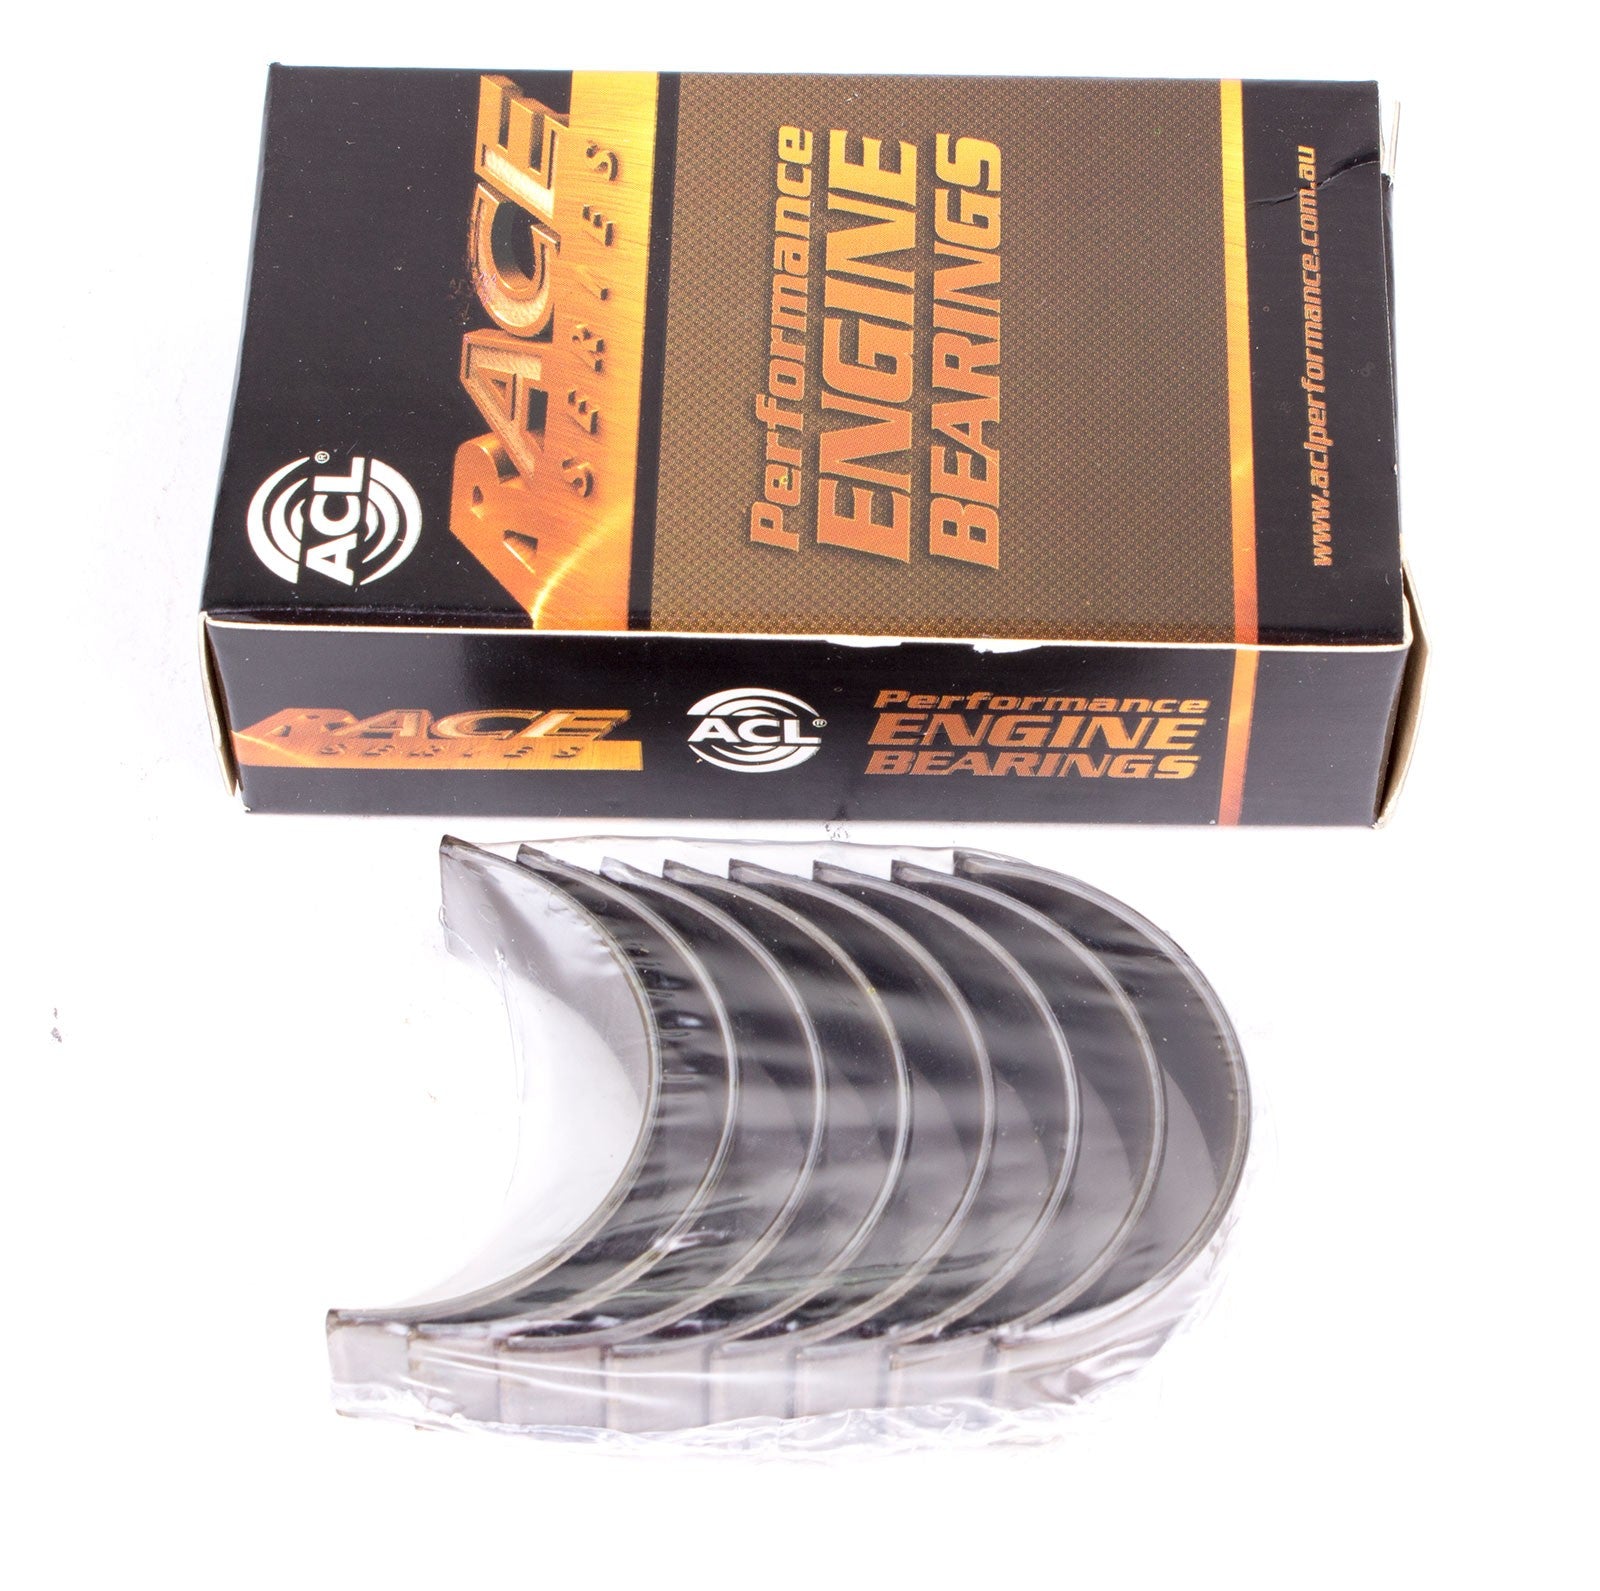 ACL 4SM2222H-010 Main bearing set (ACL Race Series) Photo-0 